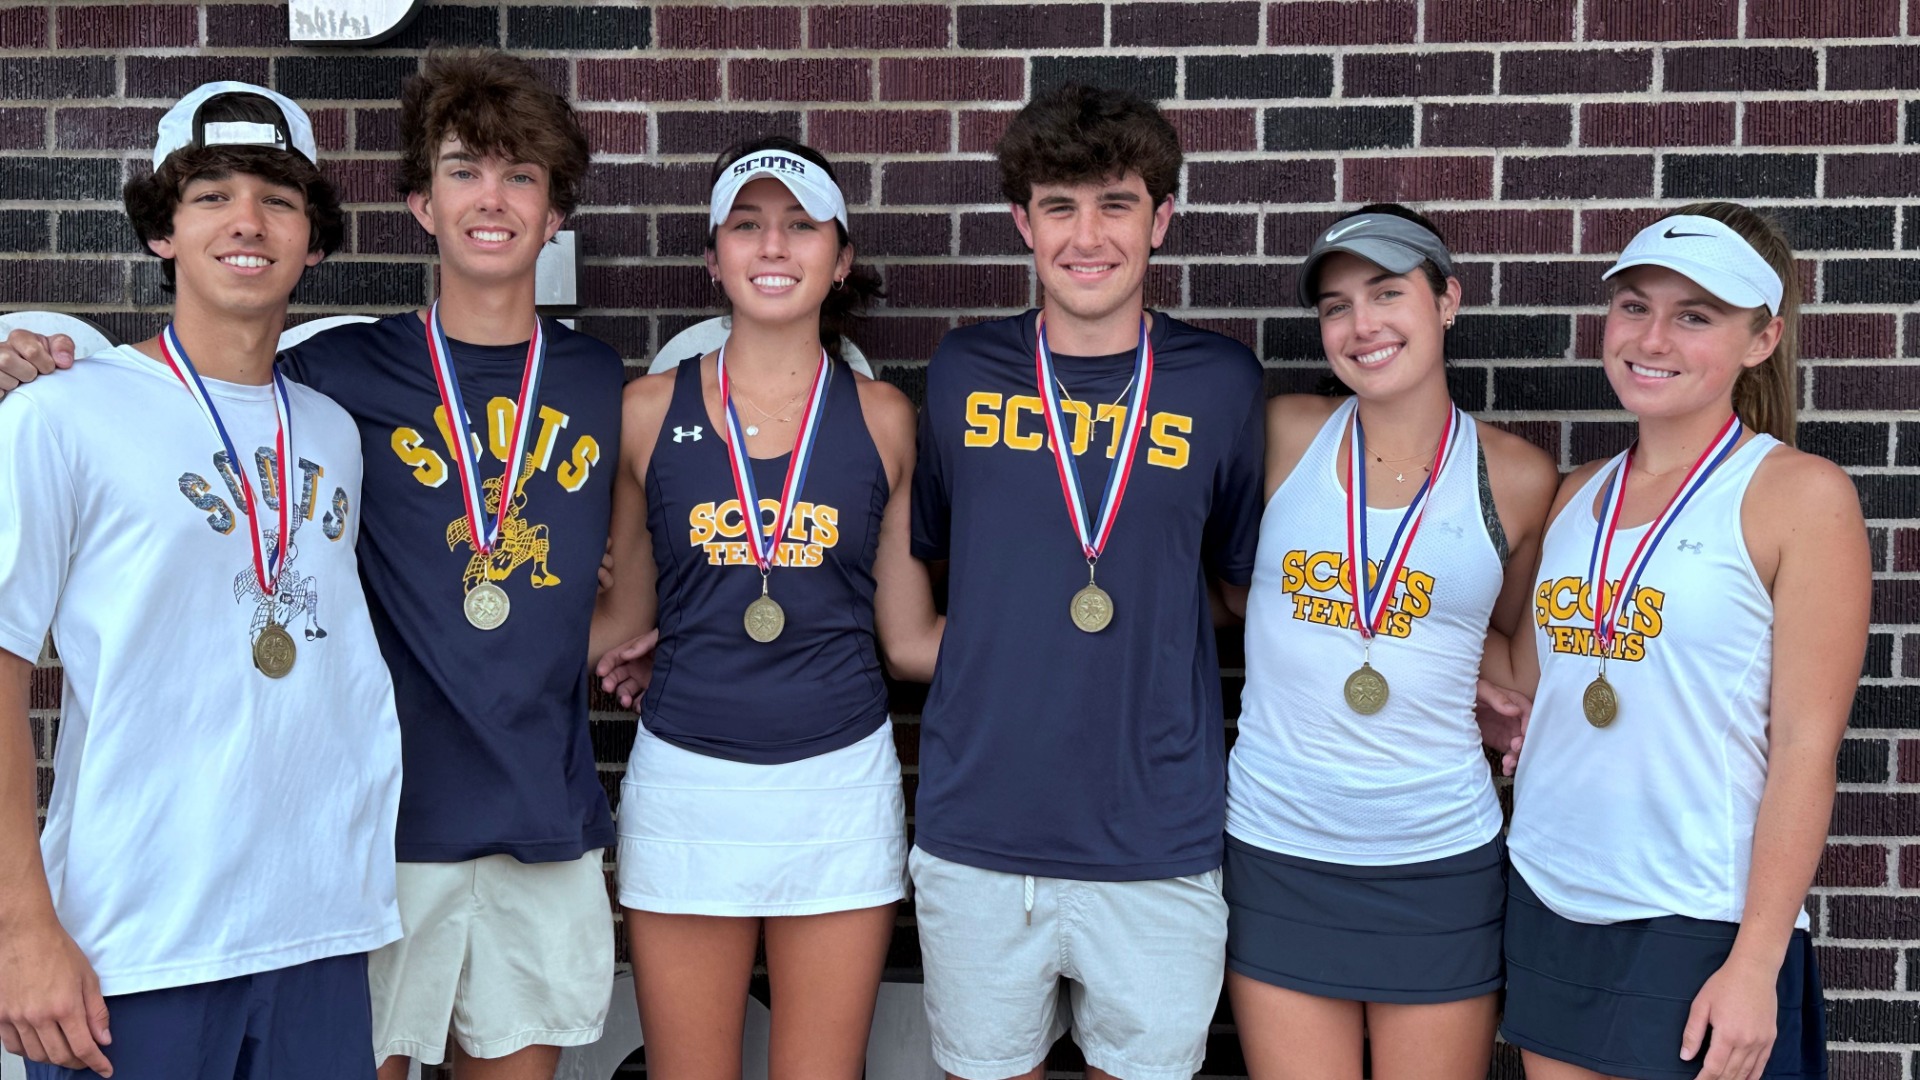 Slide 7 - Scots Varsity Tennis Team Competes Well at District Tournament